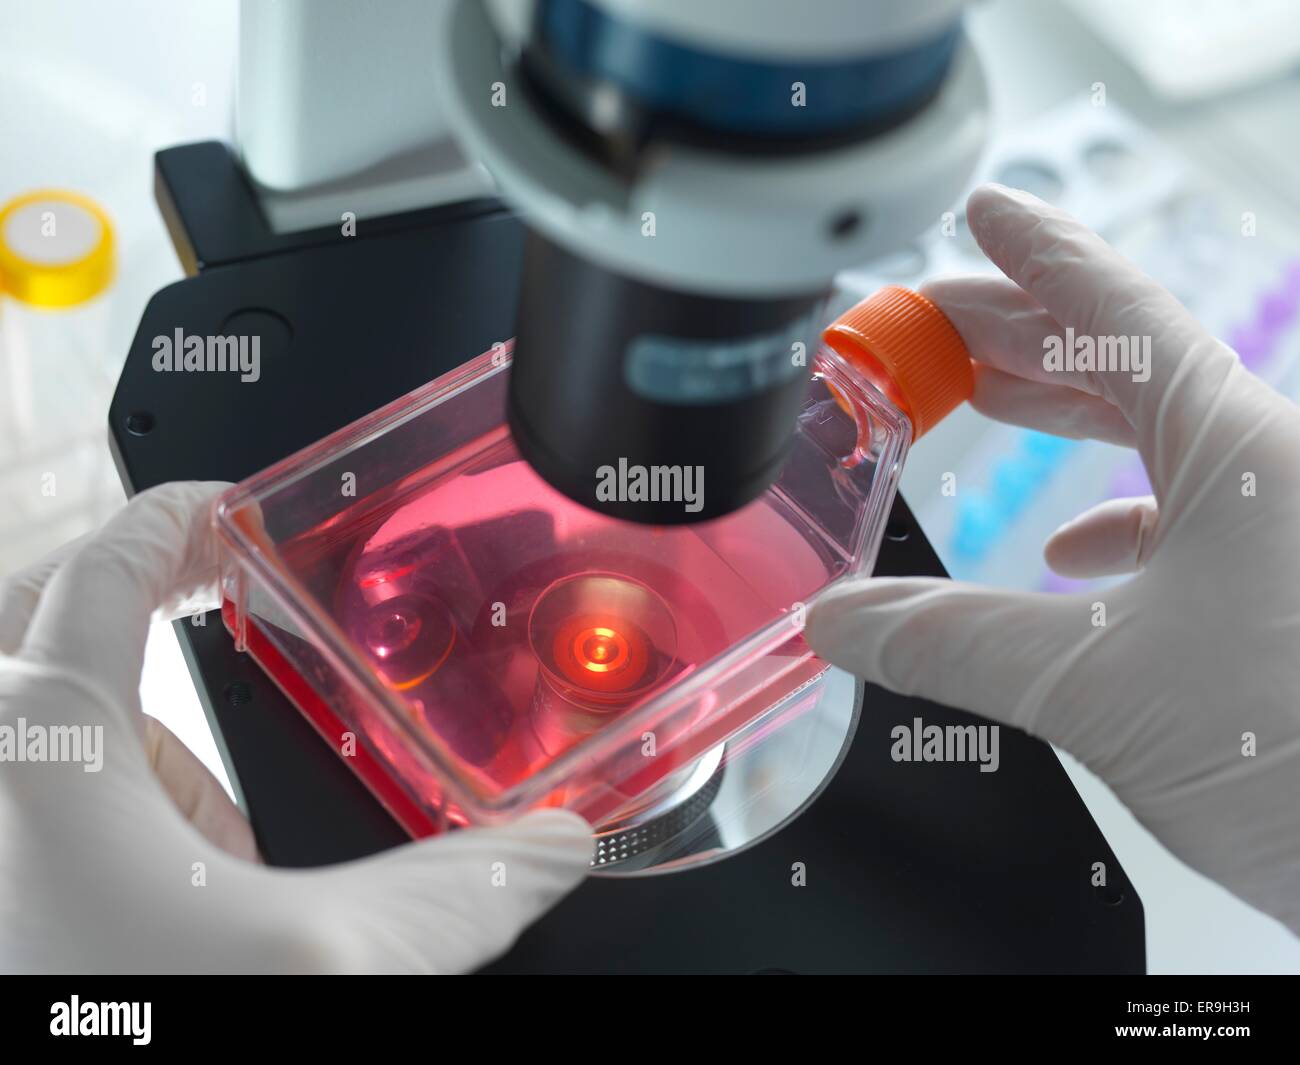 PROPERTY RELEASED. MODEL RELEASED. Biological research. Laboratory researcher using a light microscope to examine the contents of a culture jar. Stock Photo